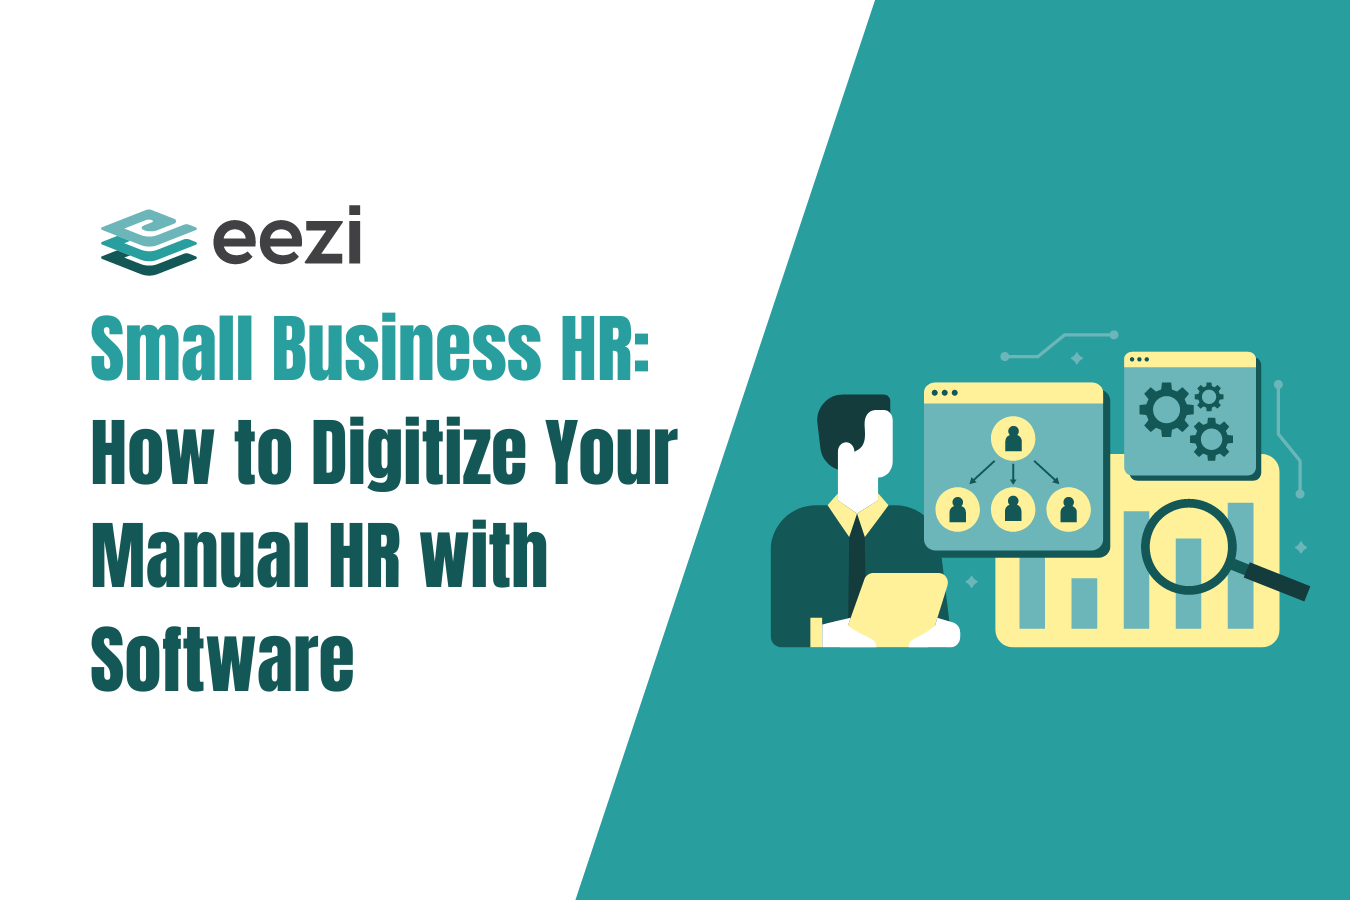 Small Business HR: How to Digitize Your Manual HR with Software